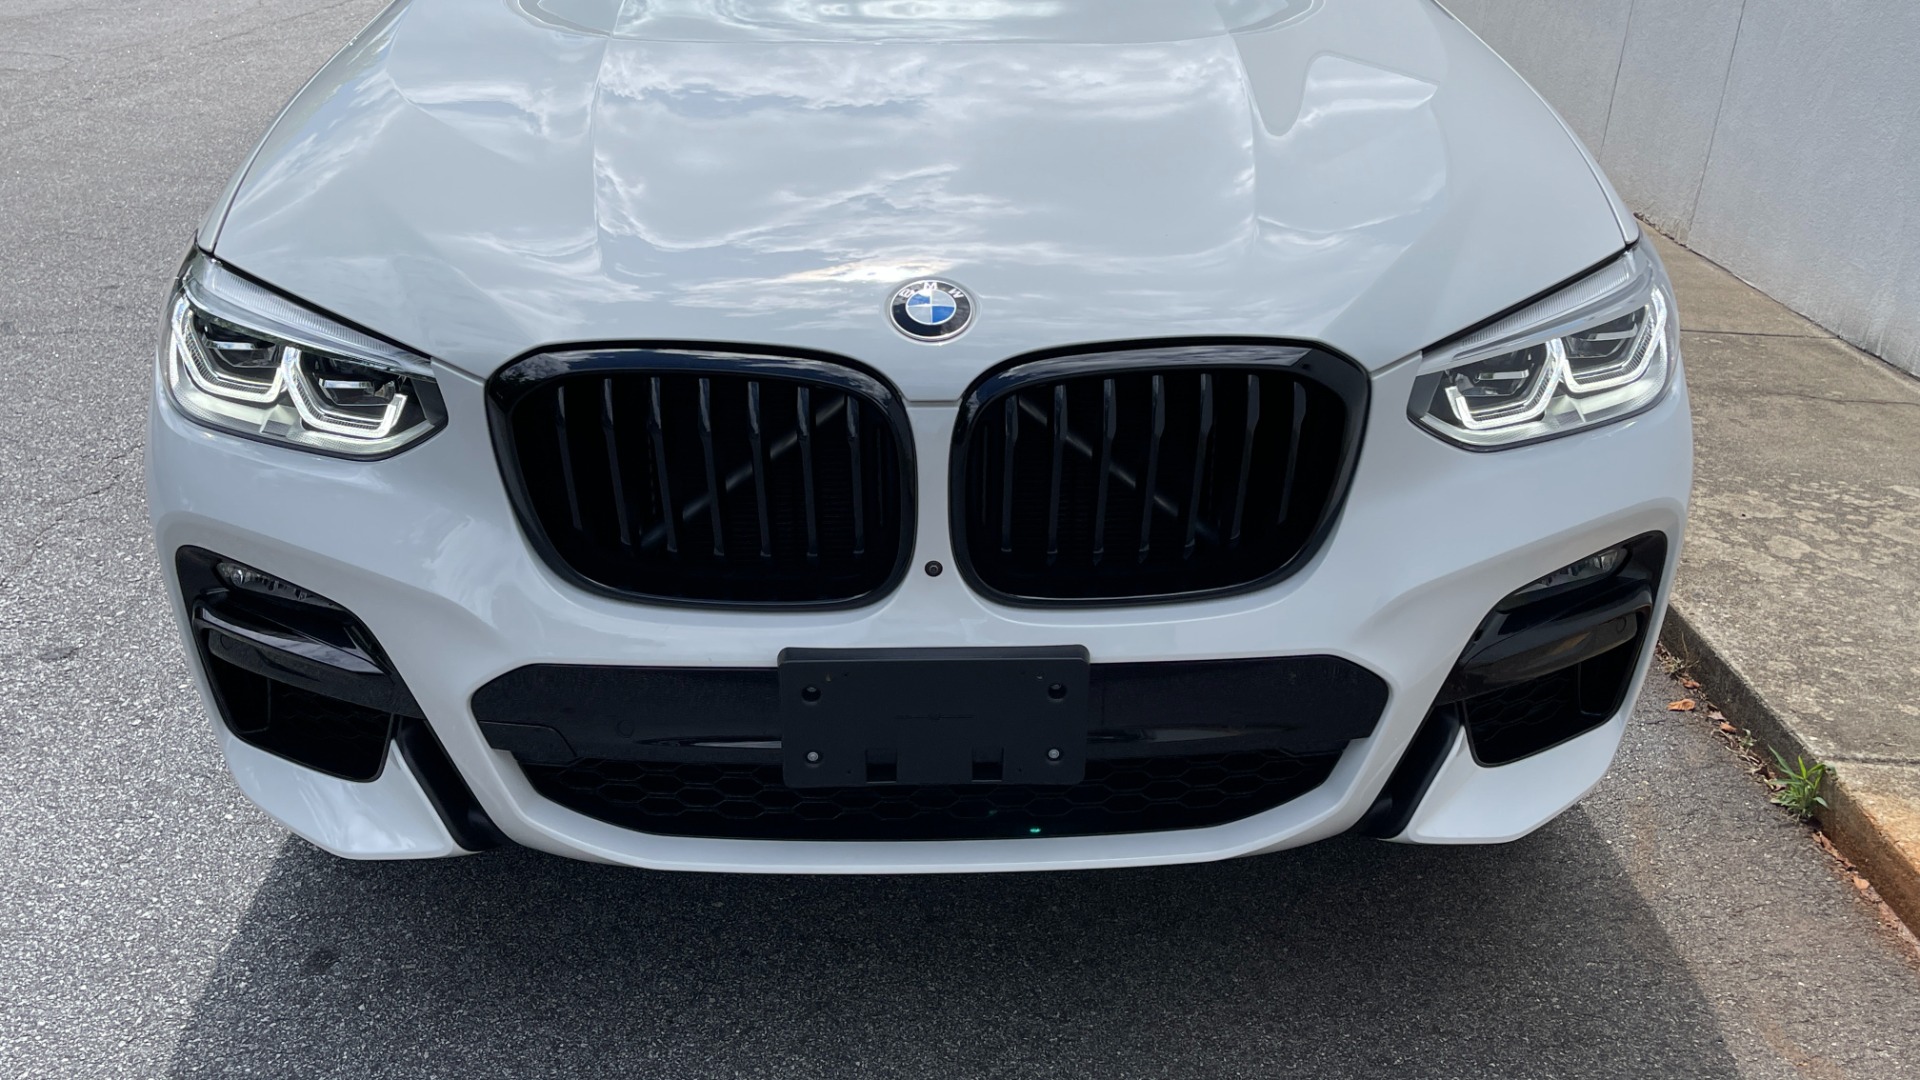 Used 2021 BMW X3 M40i / EXECUTIVE PACKAGE / SHADOWLINE TRIM / HEADS UP DISPLAY / AMBIENT LIG for sale Sold at Formula Imports in Charlotte NC 28227 6